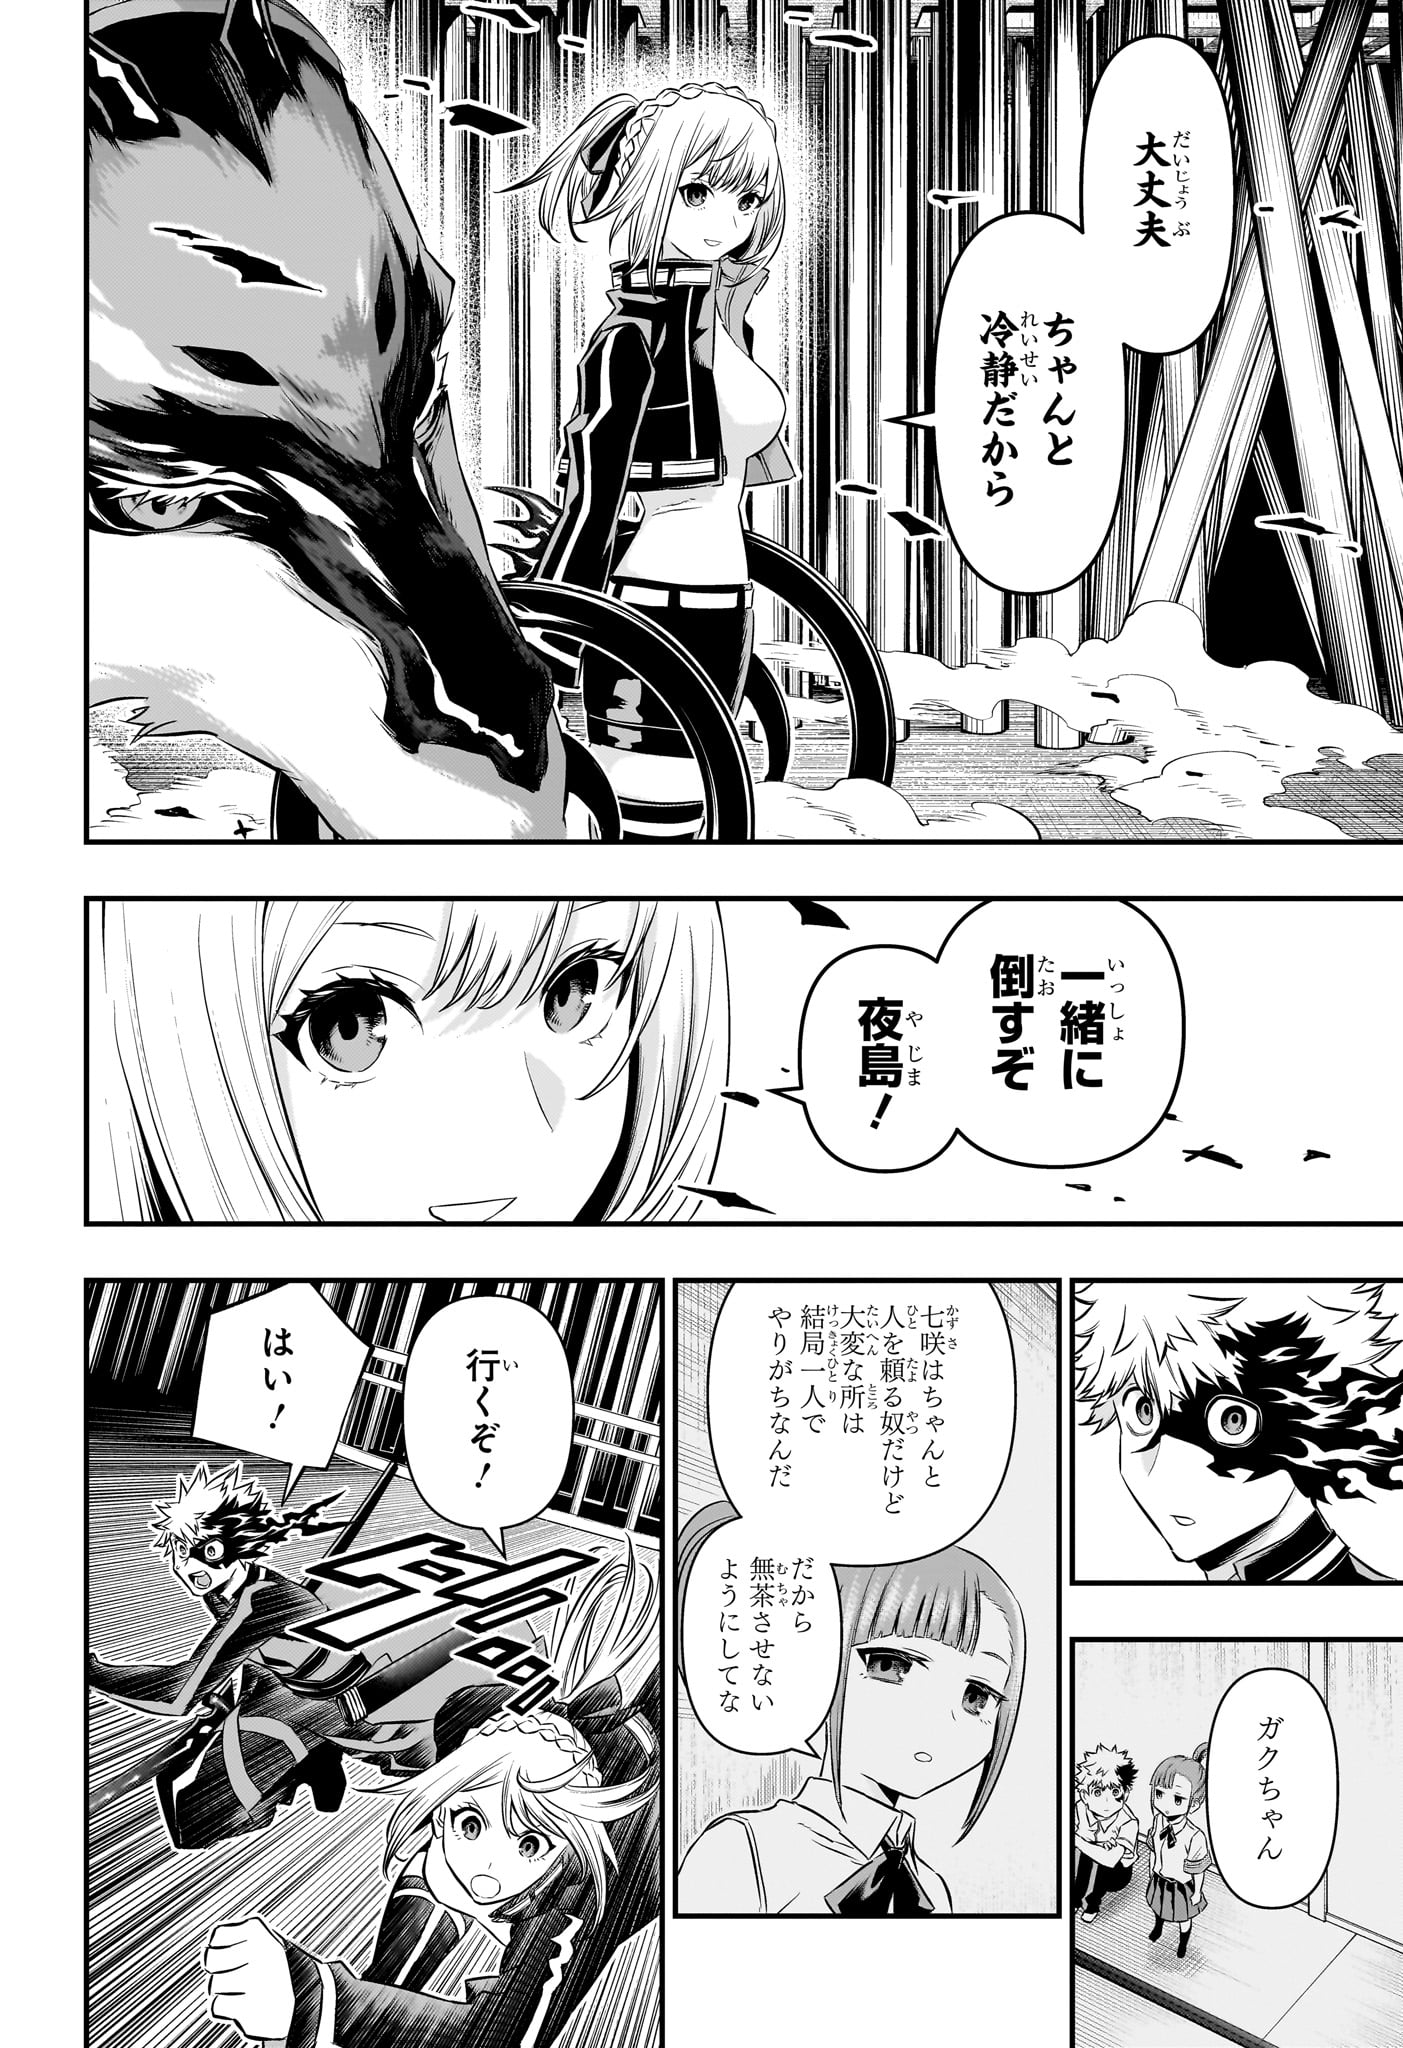 Nue no Onmyouji - Chapter 52 - Page 8